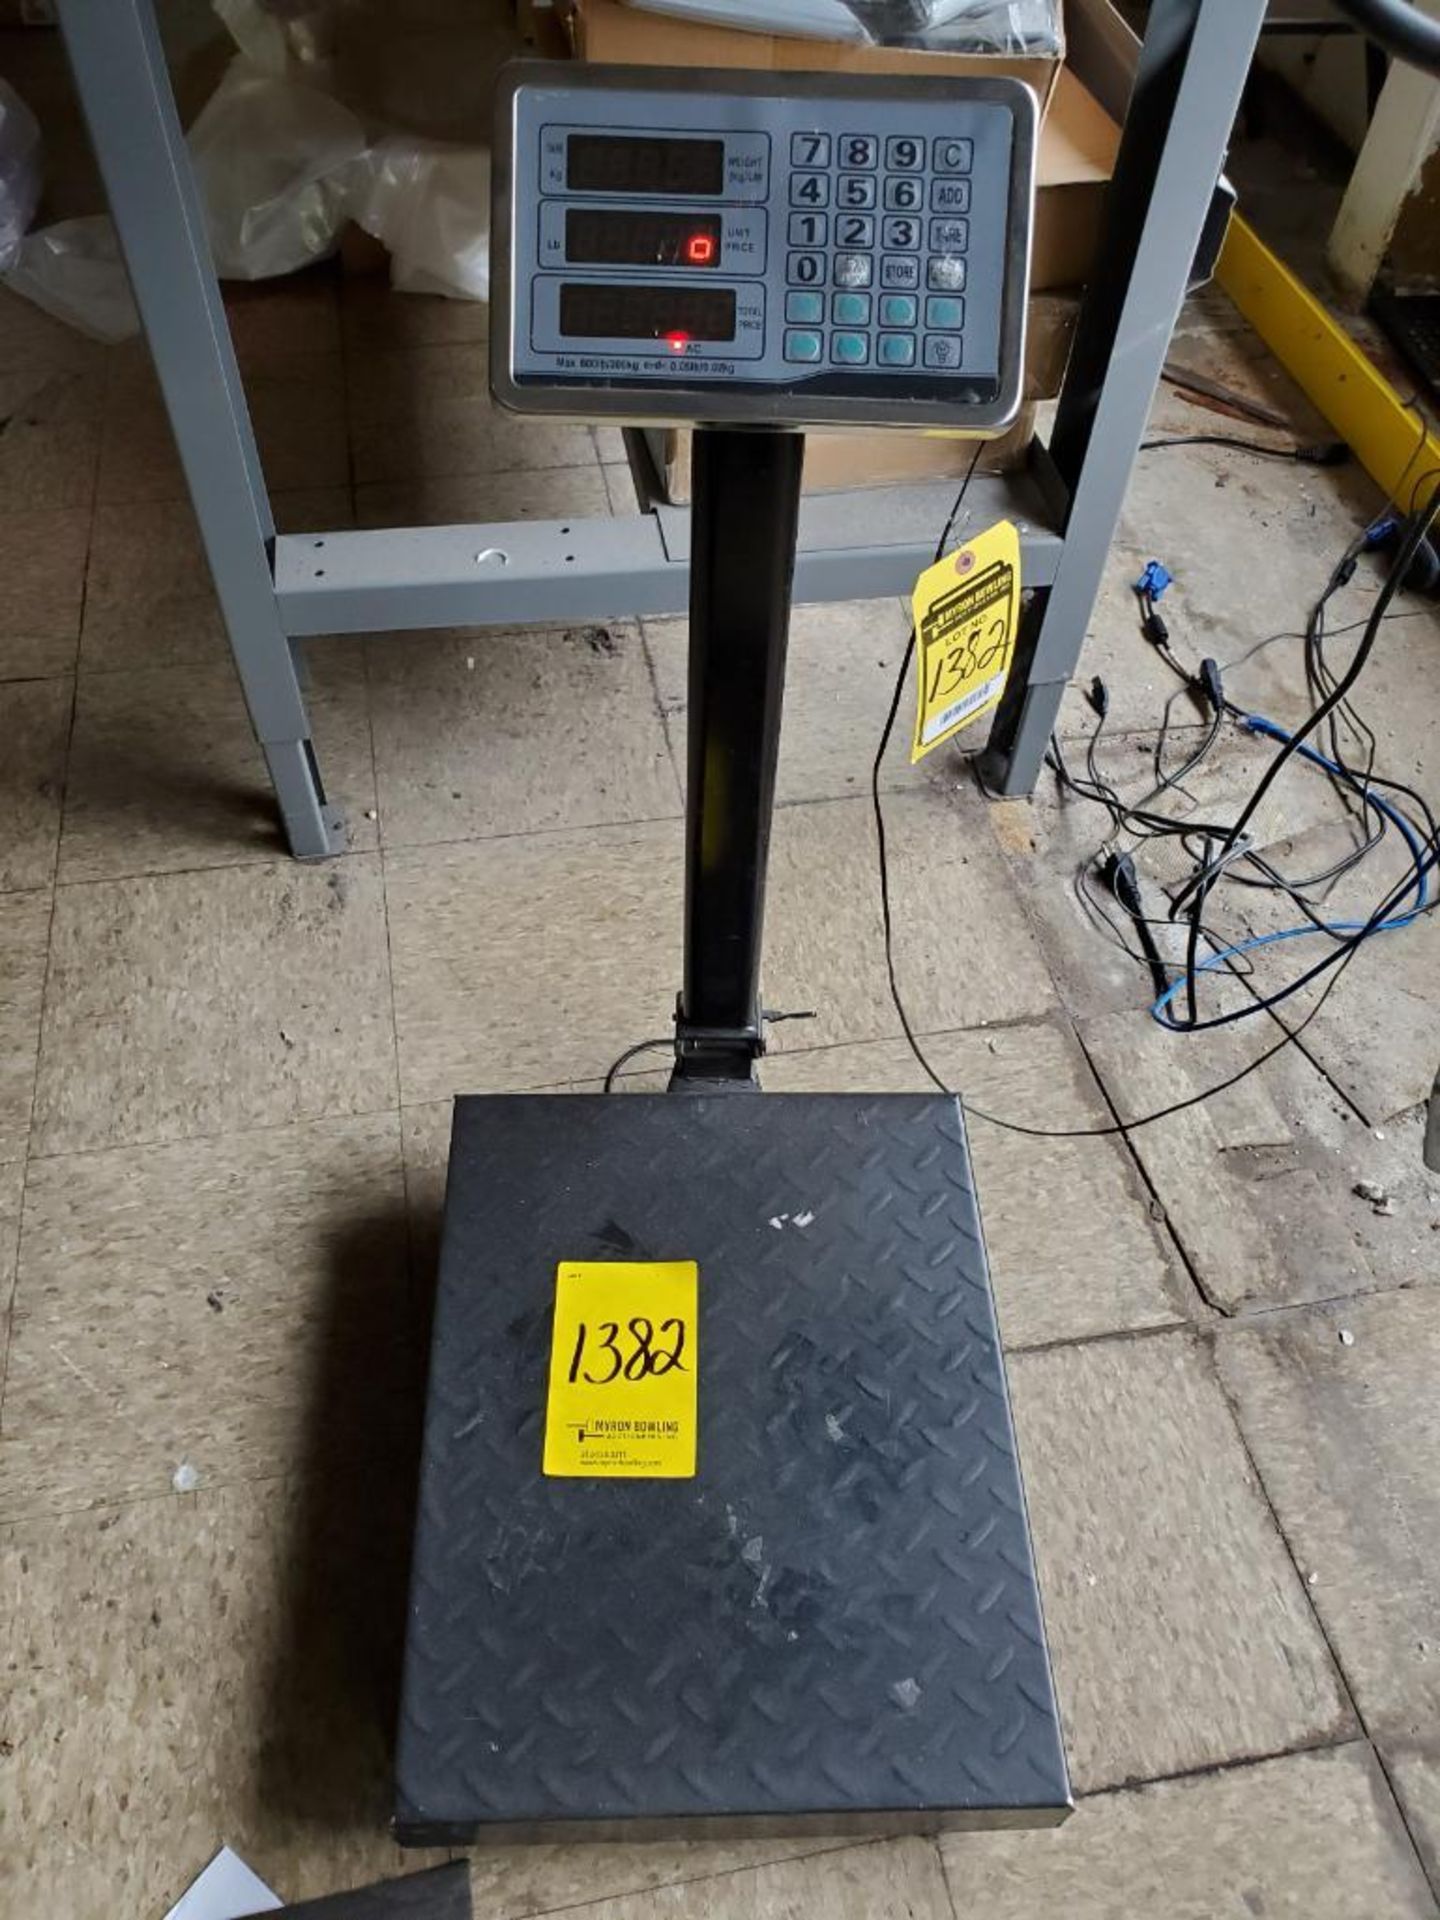 TCS-300KG PRICE SCALE, 110 V., 300 KG MAX WEIGHT, S/N 169434 - Image 3 of 4